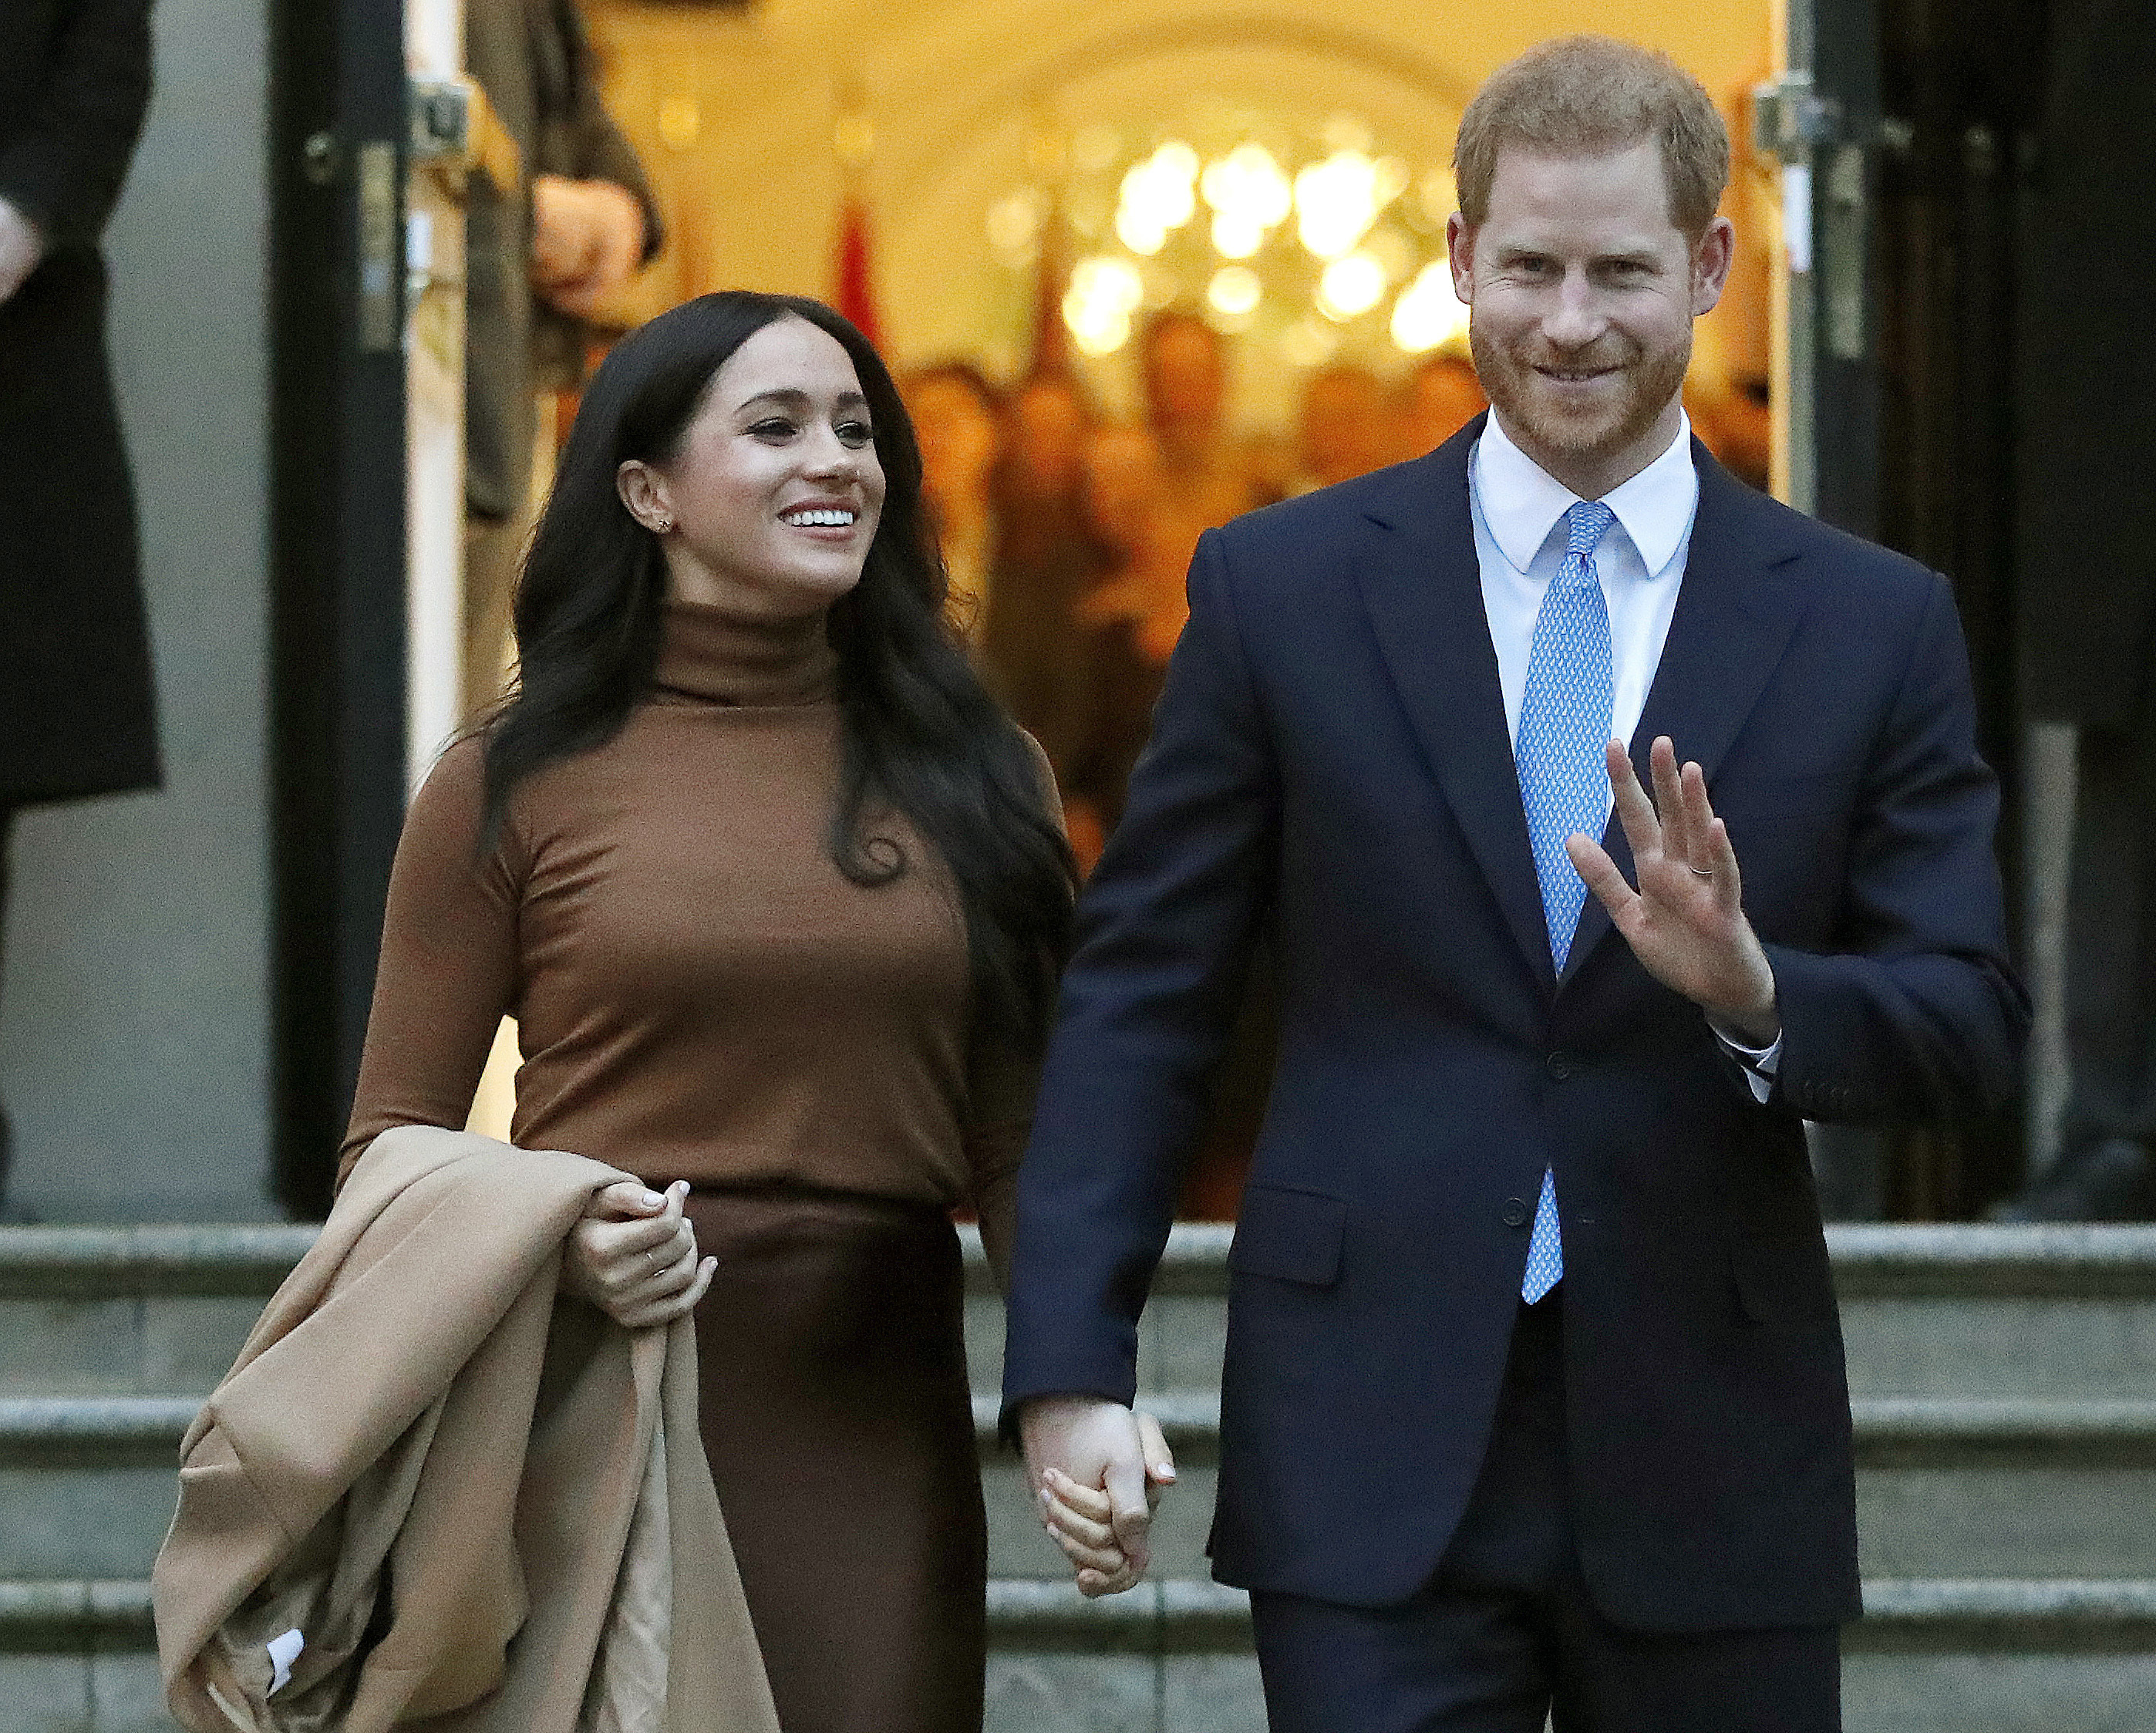  The royal couple are understanded to be looking for someone to help run their day-to-day lives in LA